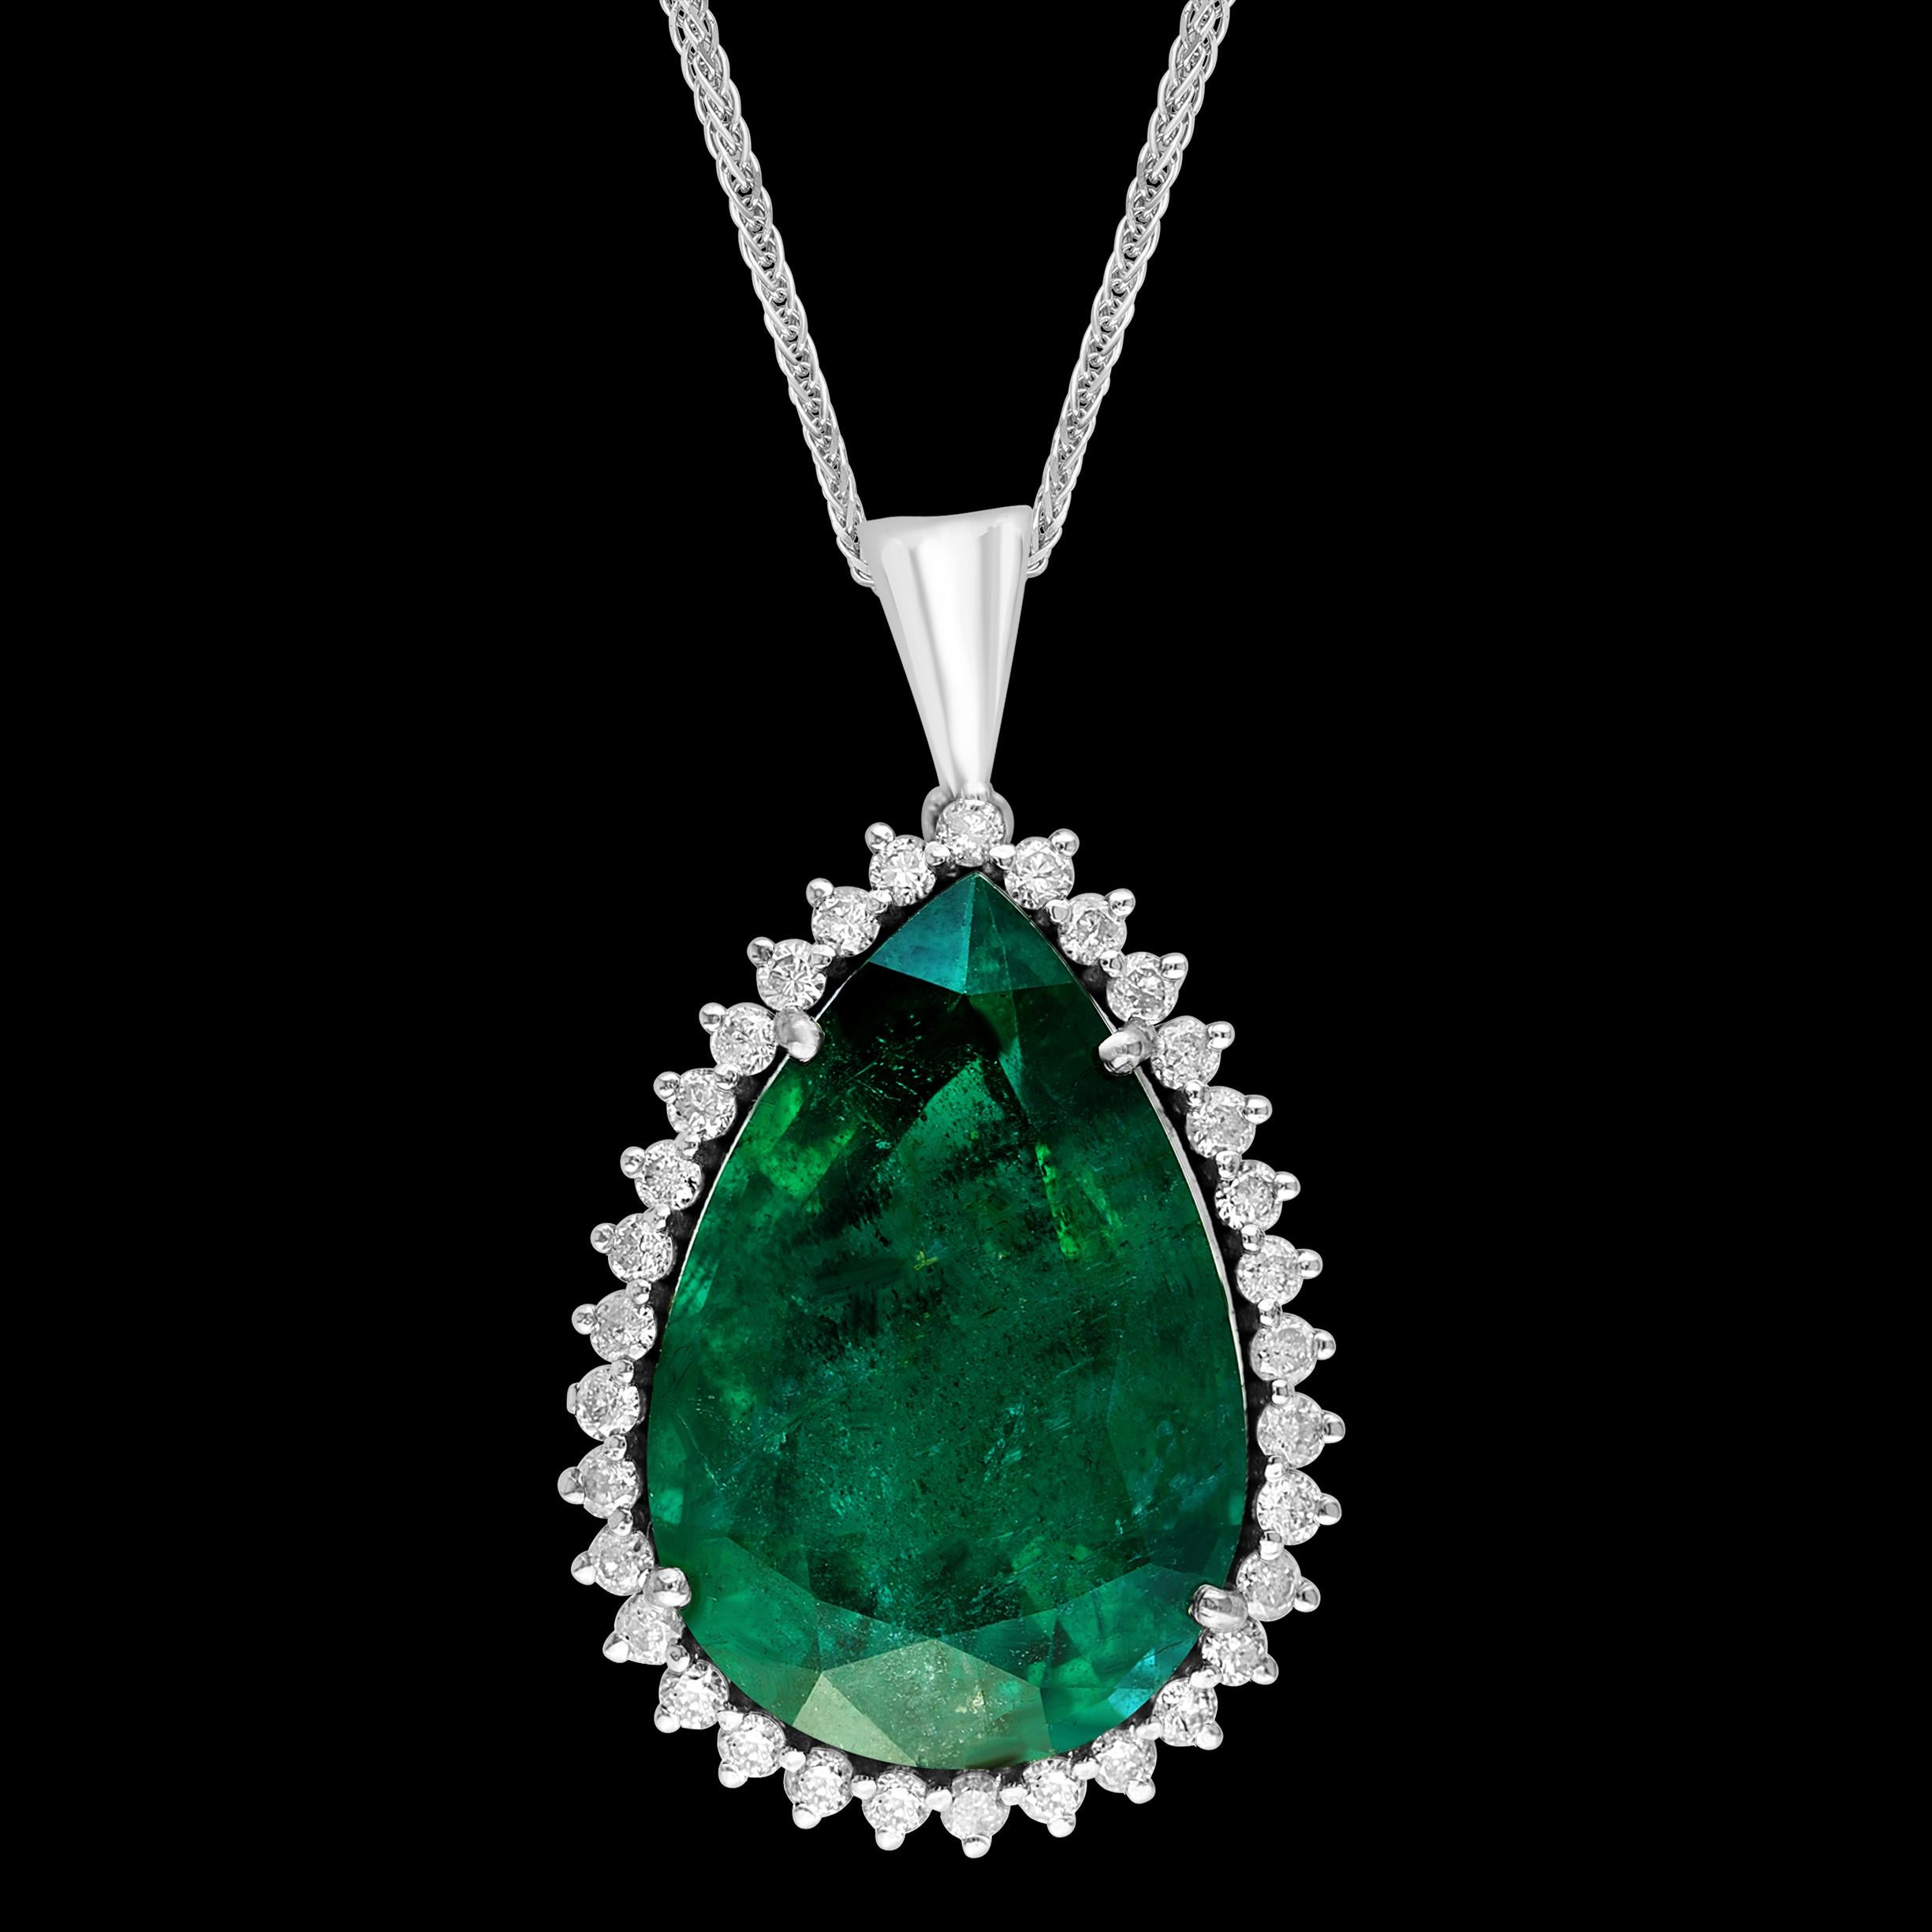 13 Ct Pear Cut Emerald & 1 Ct Diamond Halo Pendent/Necklace 14 KW Gold Chain 8